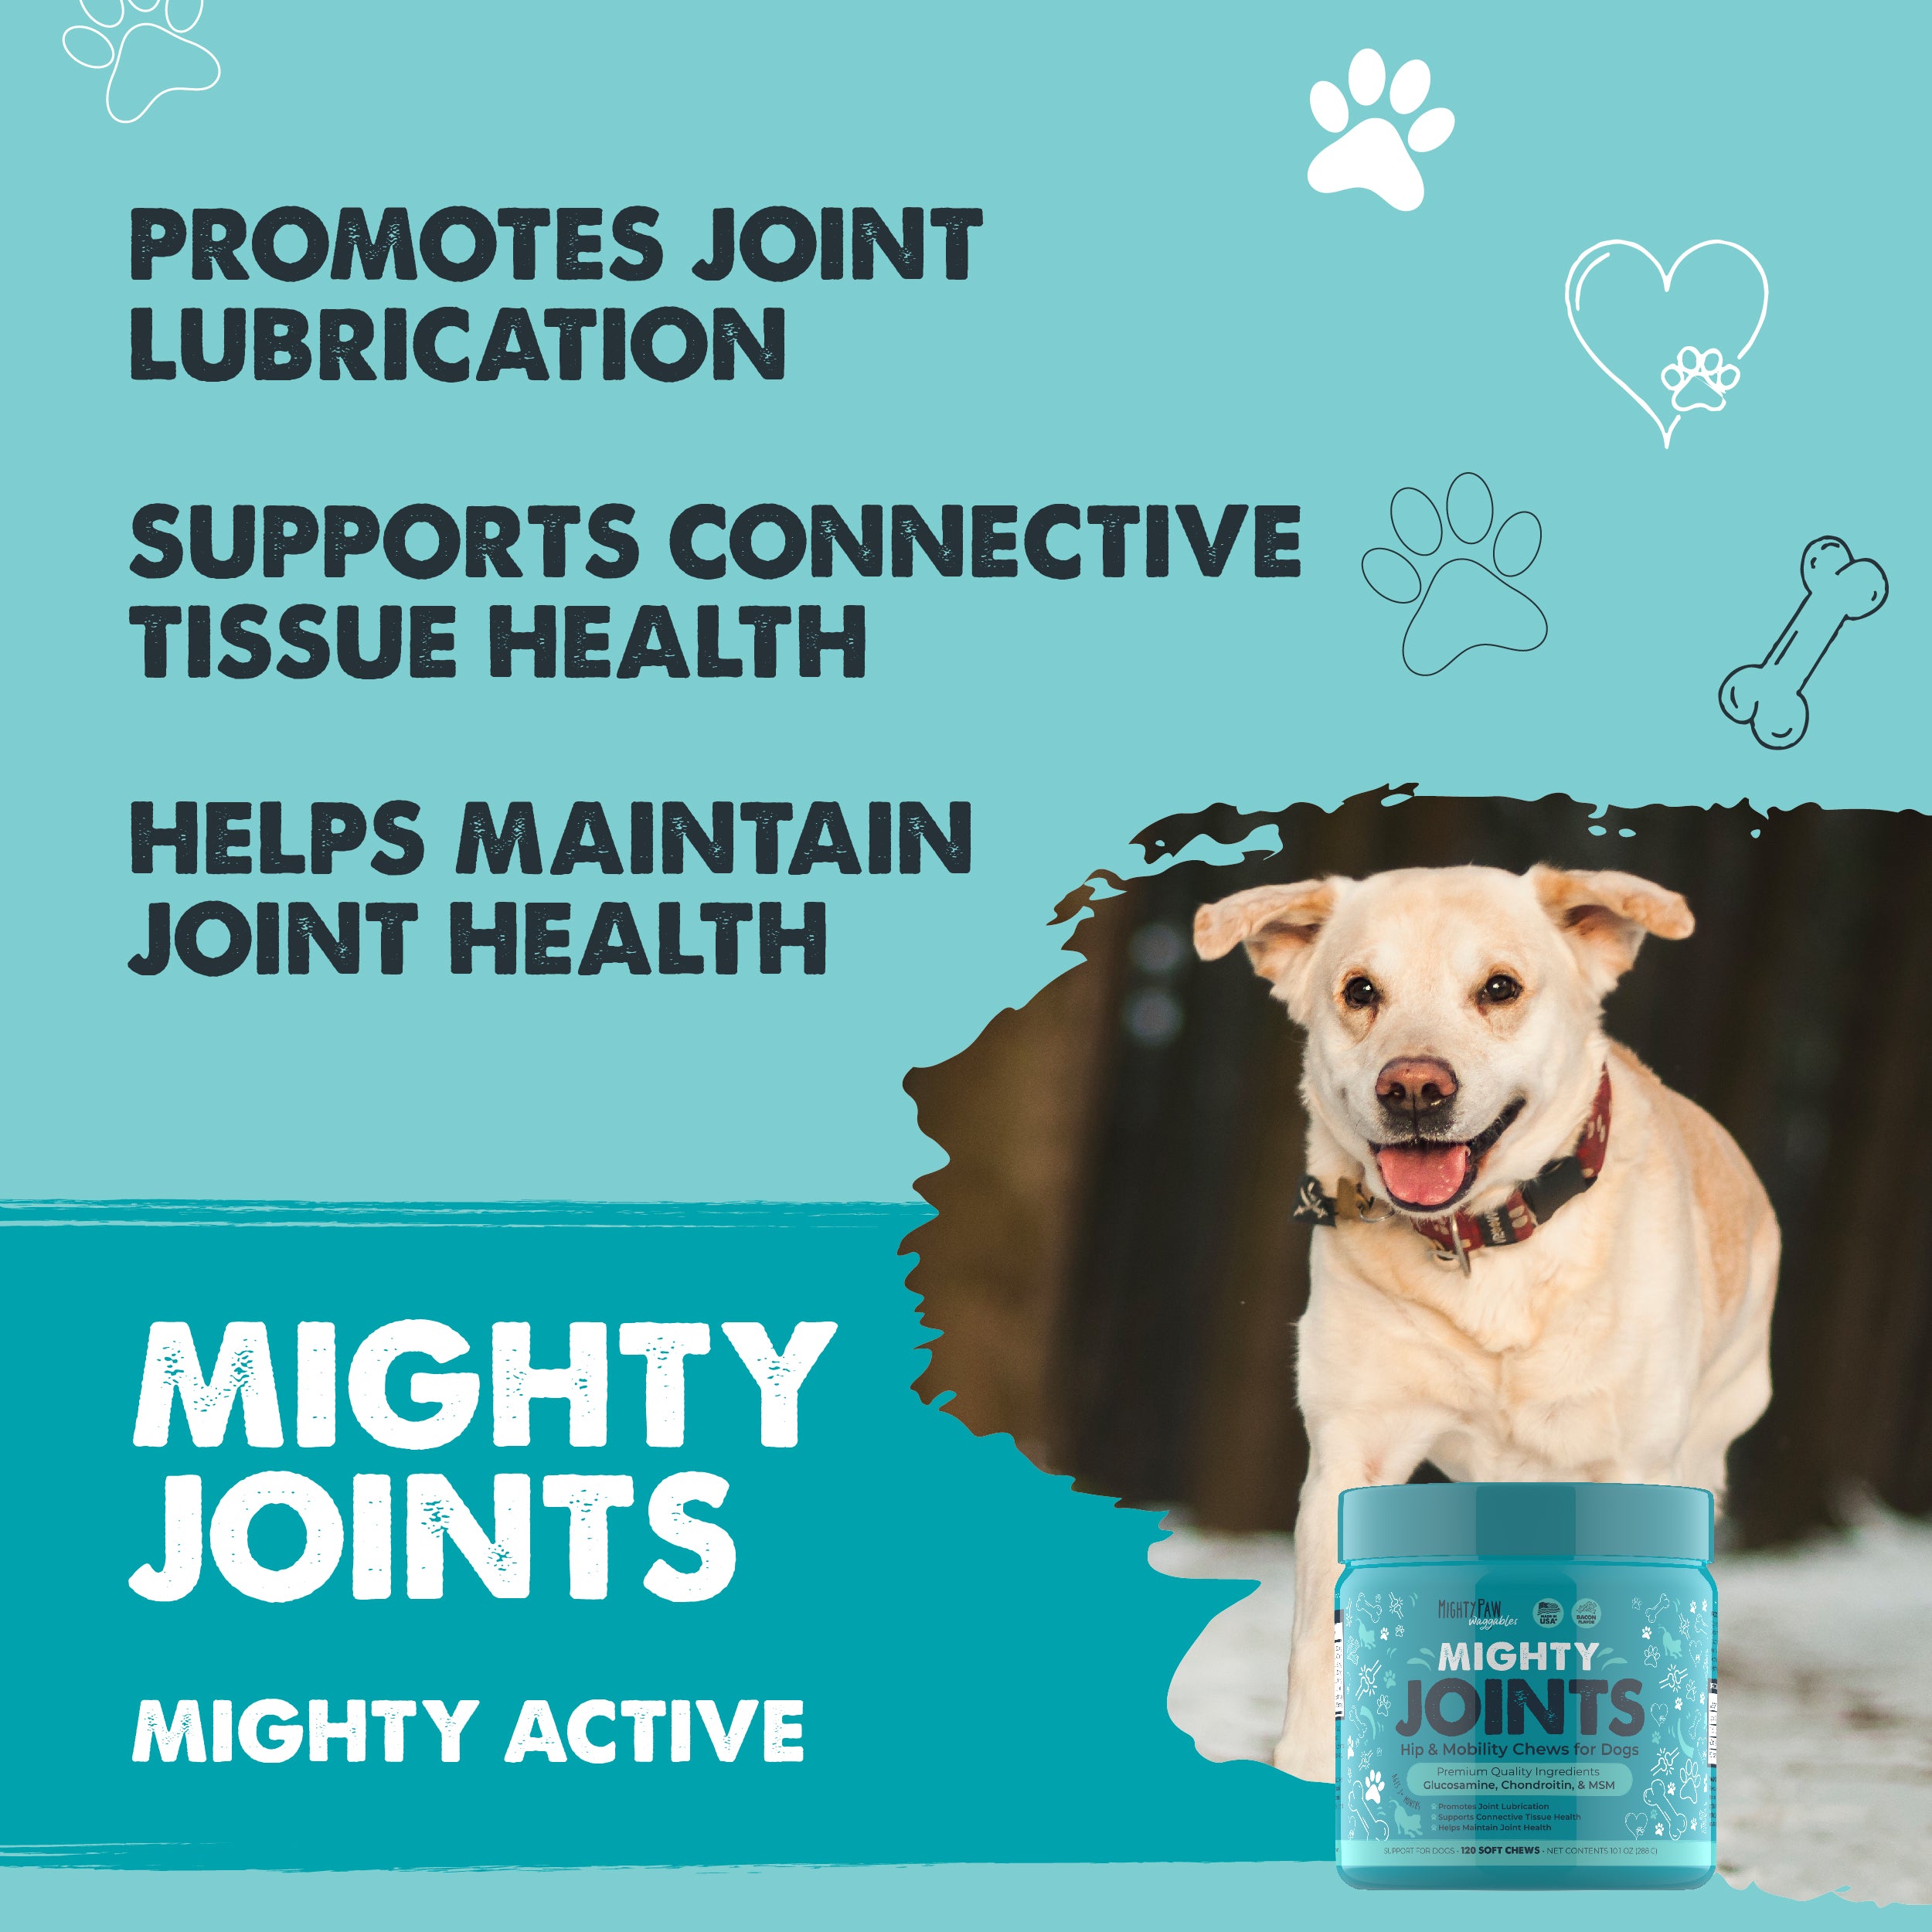 Mighty Joints Chews for Dogs | Hip and Joint Support